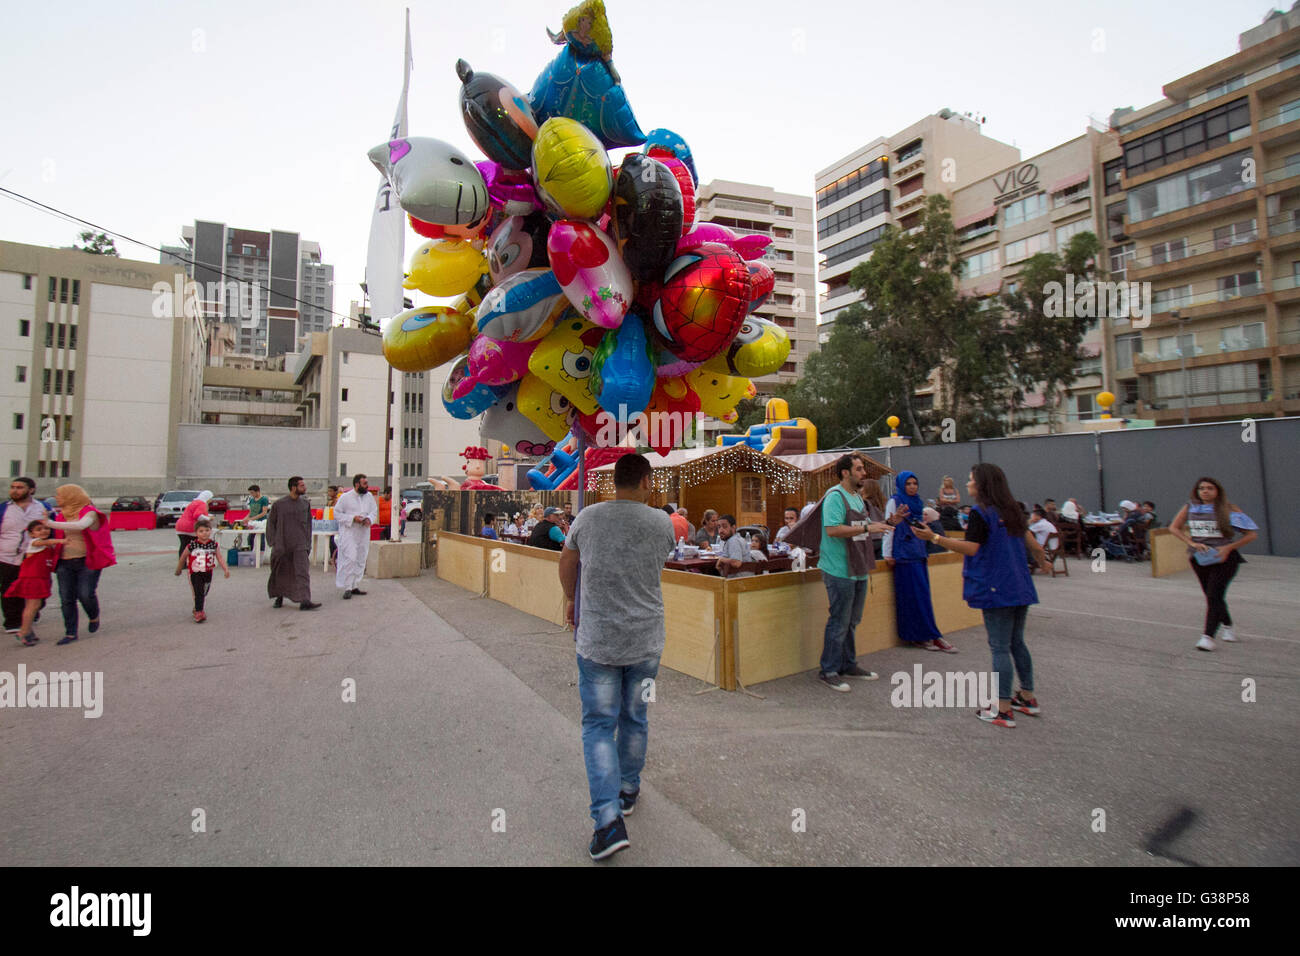 Beirut, Lebanon. 9th June, 2016. A man carries balloons as Devout Muslim families prepare to end their daily Ramadan fast at sunset for the evening meal known as 'Iftar'  at the purposely built Ramadan Village in Beirut Credit:  amer ghazzal/Alamy Live News Stock Photo